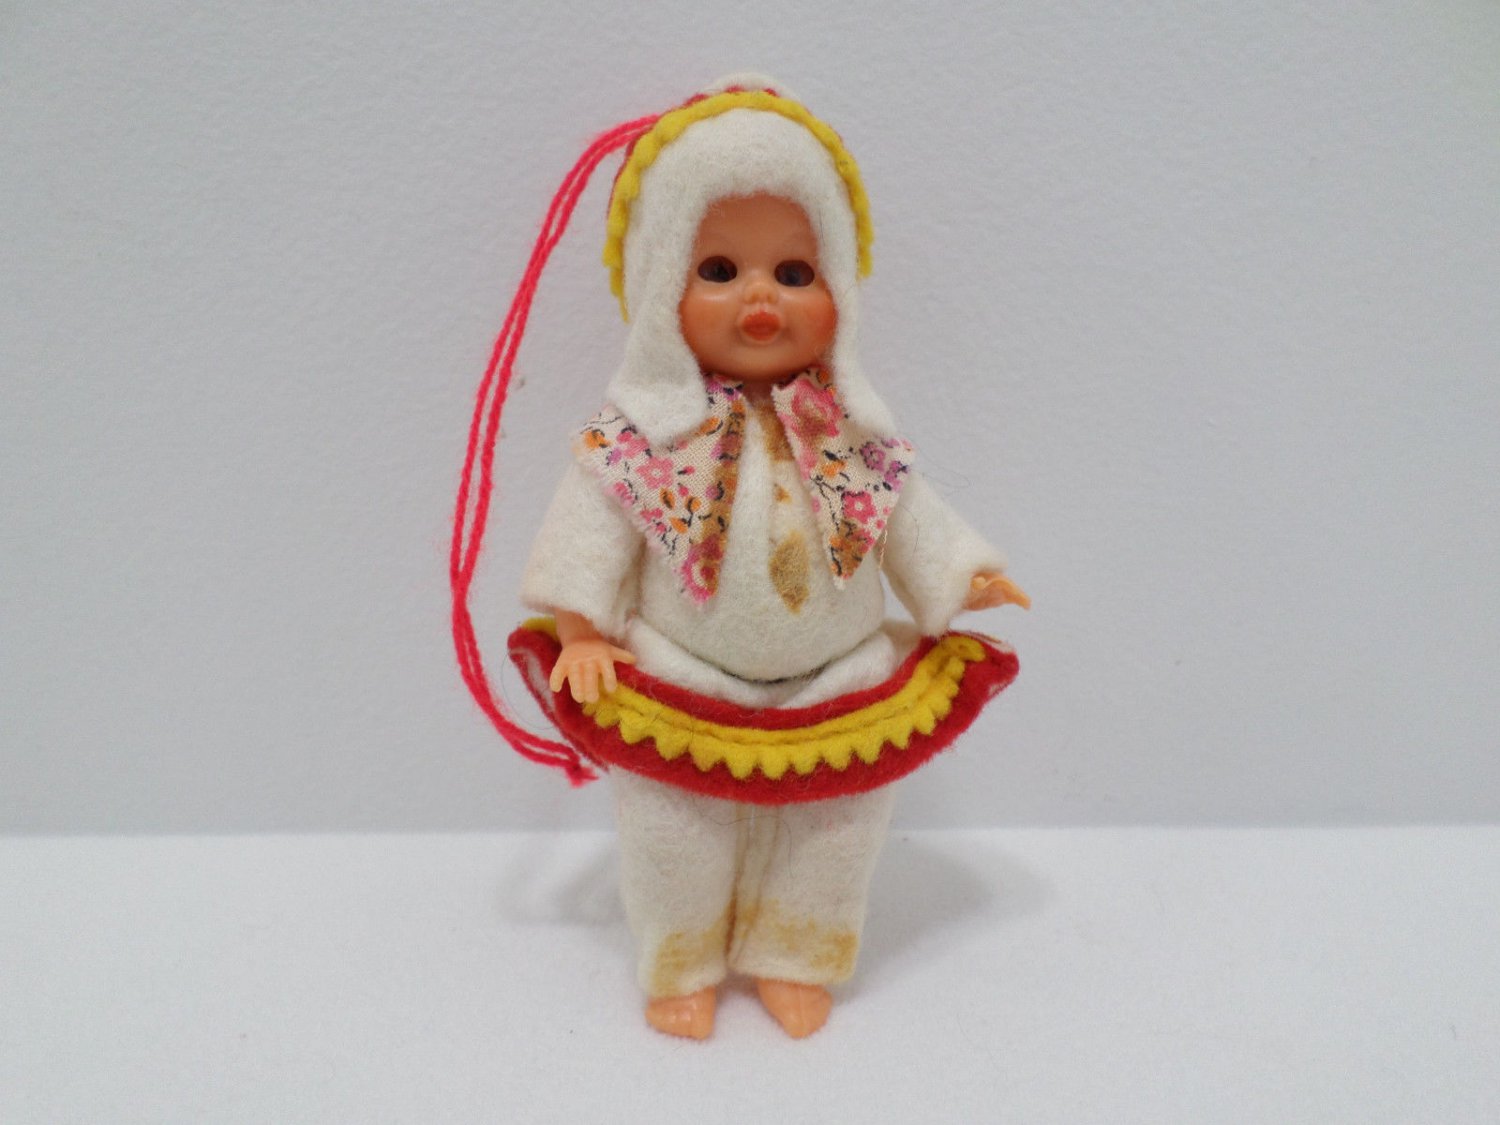 Vintage Miniature Plastic Doll for Parts or Repair